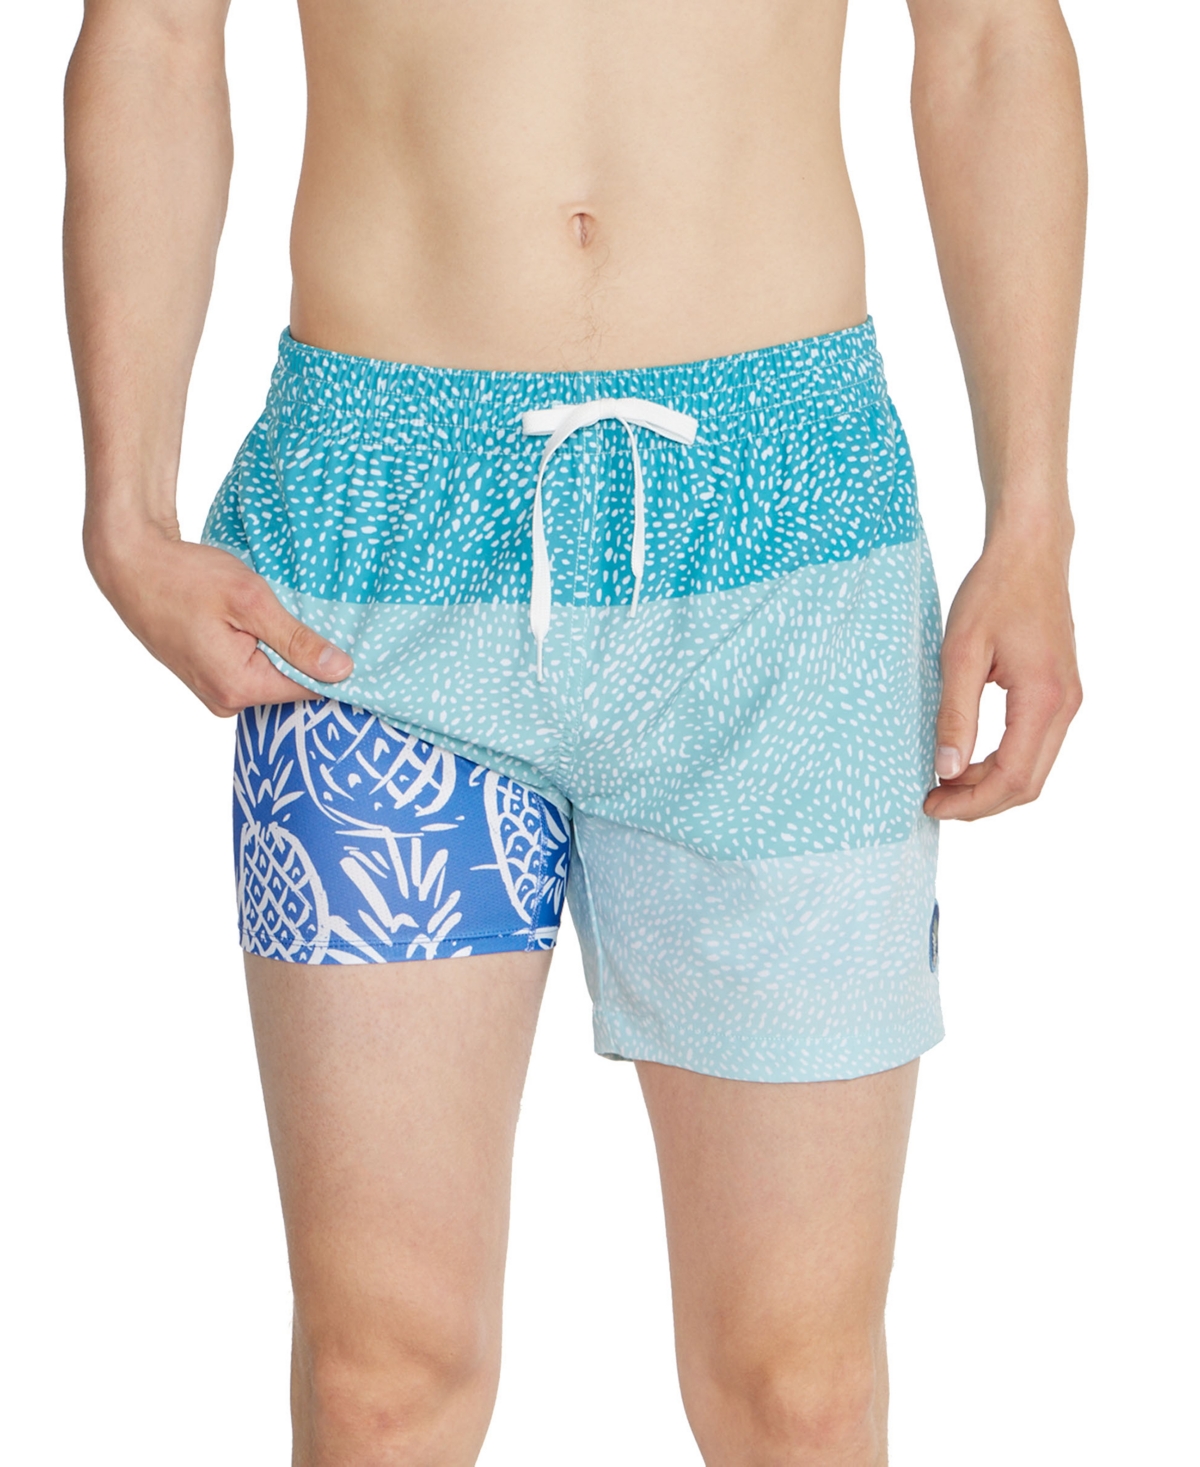 Men's The Whale Sharks Quick-Dry 5-1/2" Swim Trunks with Boxer Brief Liner - Turquoise/Aqua